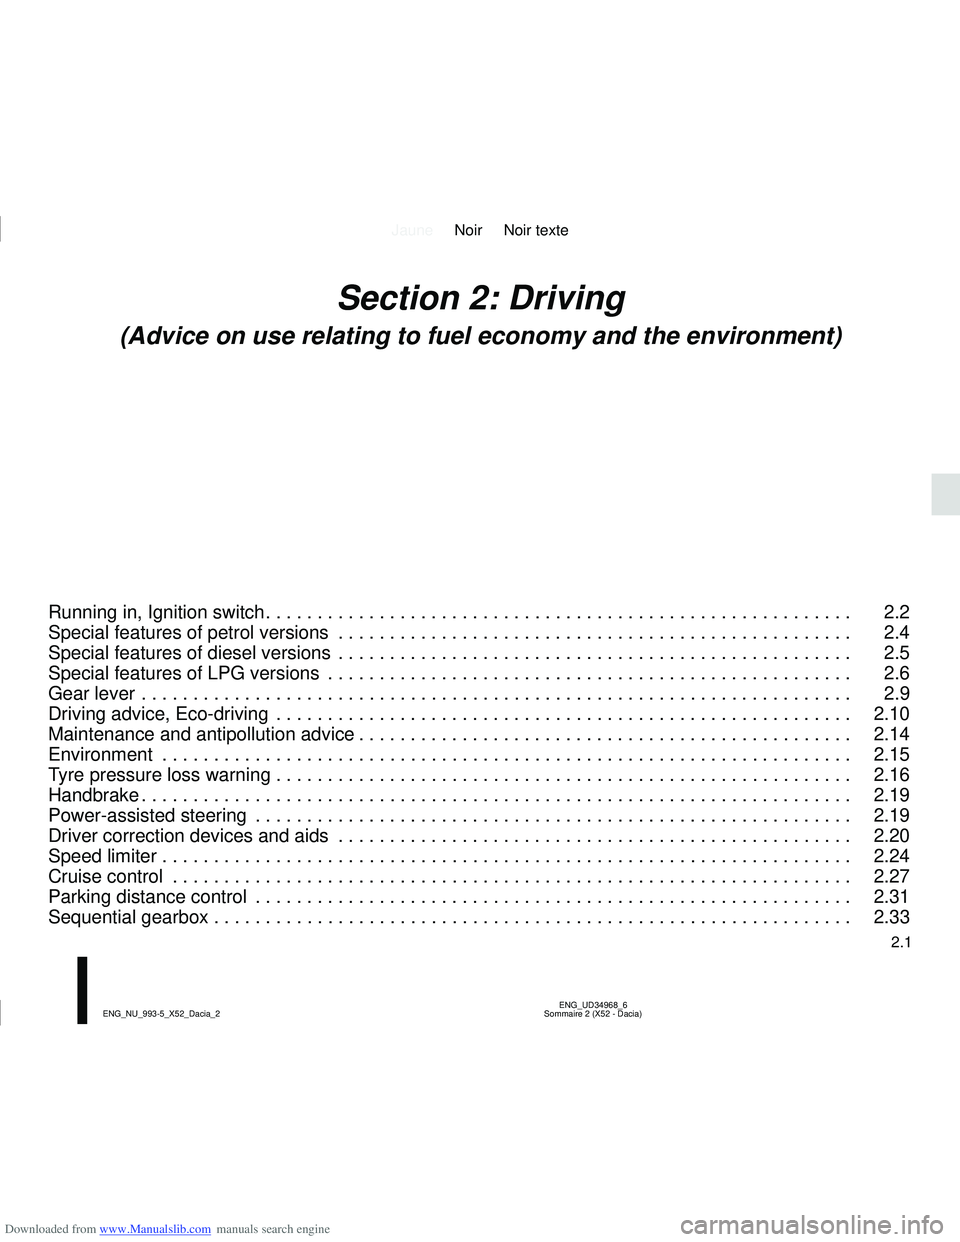 DACIA SANDERO 2022  Owners Manual Downloaded from www.Manualslib.com manuals search engine JauneNoir Noir texte
2.1
ENG_UD34968_6
Sommaire 2 (X52 - Dacia)
ENG_NU_993-5_X52_Dacia_2
Section 2: Driving
(Advice on use relating to fuel eco